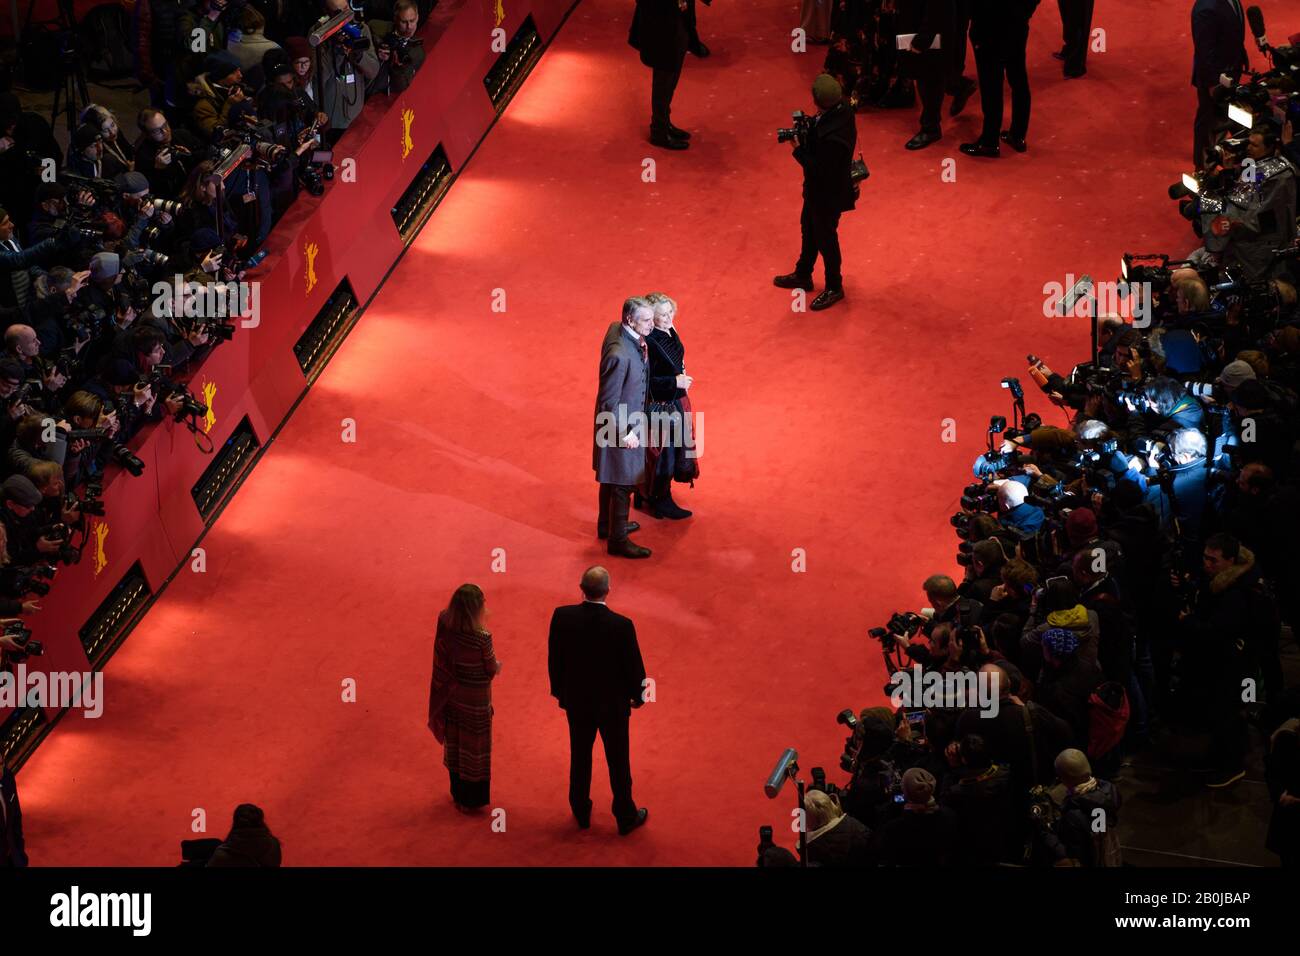 Berlin, Germany. 20th Feb, 2020. 70th Berlinale, opening gala: Actors Sinead Cusack and Jeremy Irons at the opening ceremony of the International Film Festival. The Berlinale opens with the film 'My Salinger Year'. Credit: Gregor Fischer/dpa/Alamy Live News Stock Photo